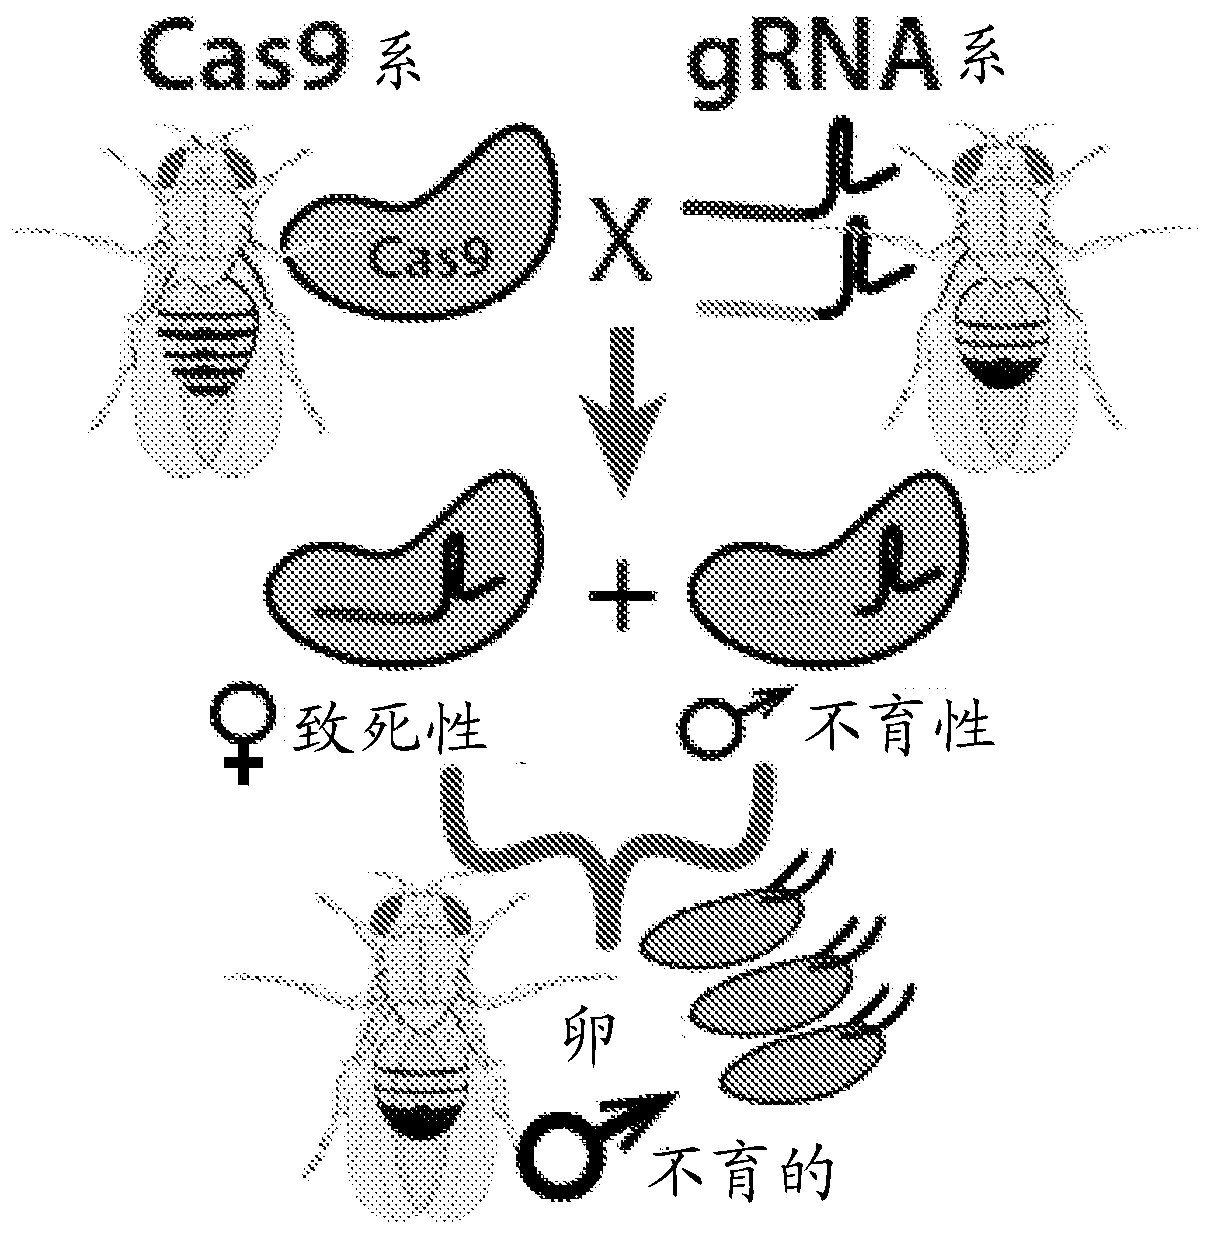 Endonuclease sexing and sterilization in insects